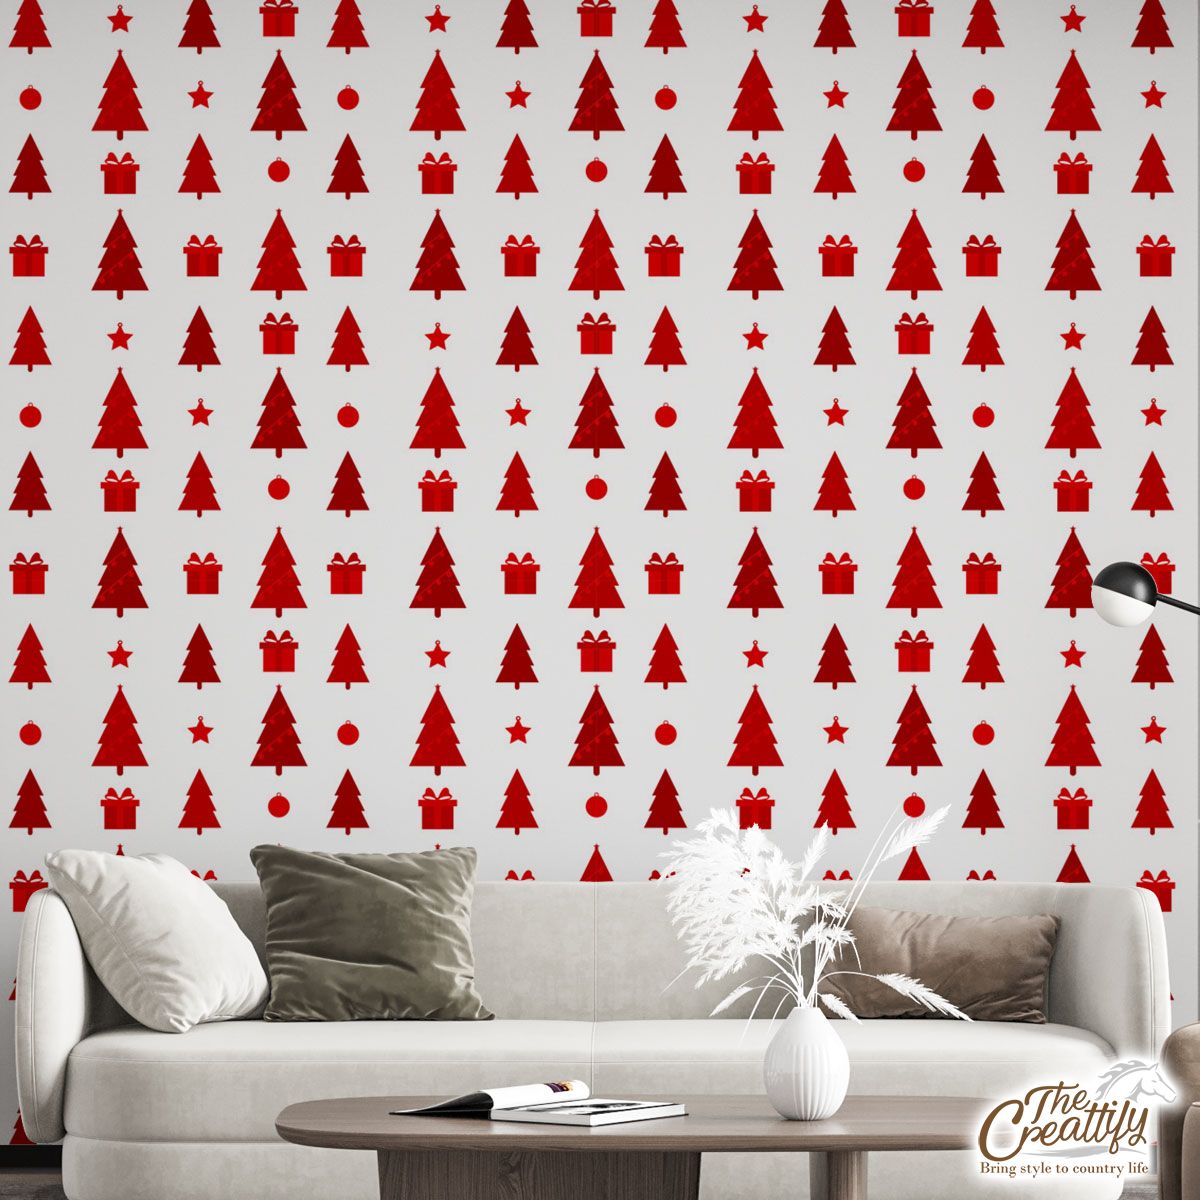 Pine Tree Silhouette And Christmas Gifts Seamless Pattern Wall Mural